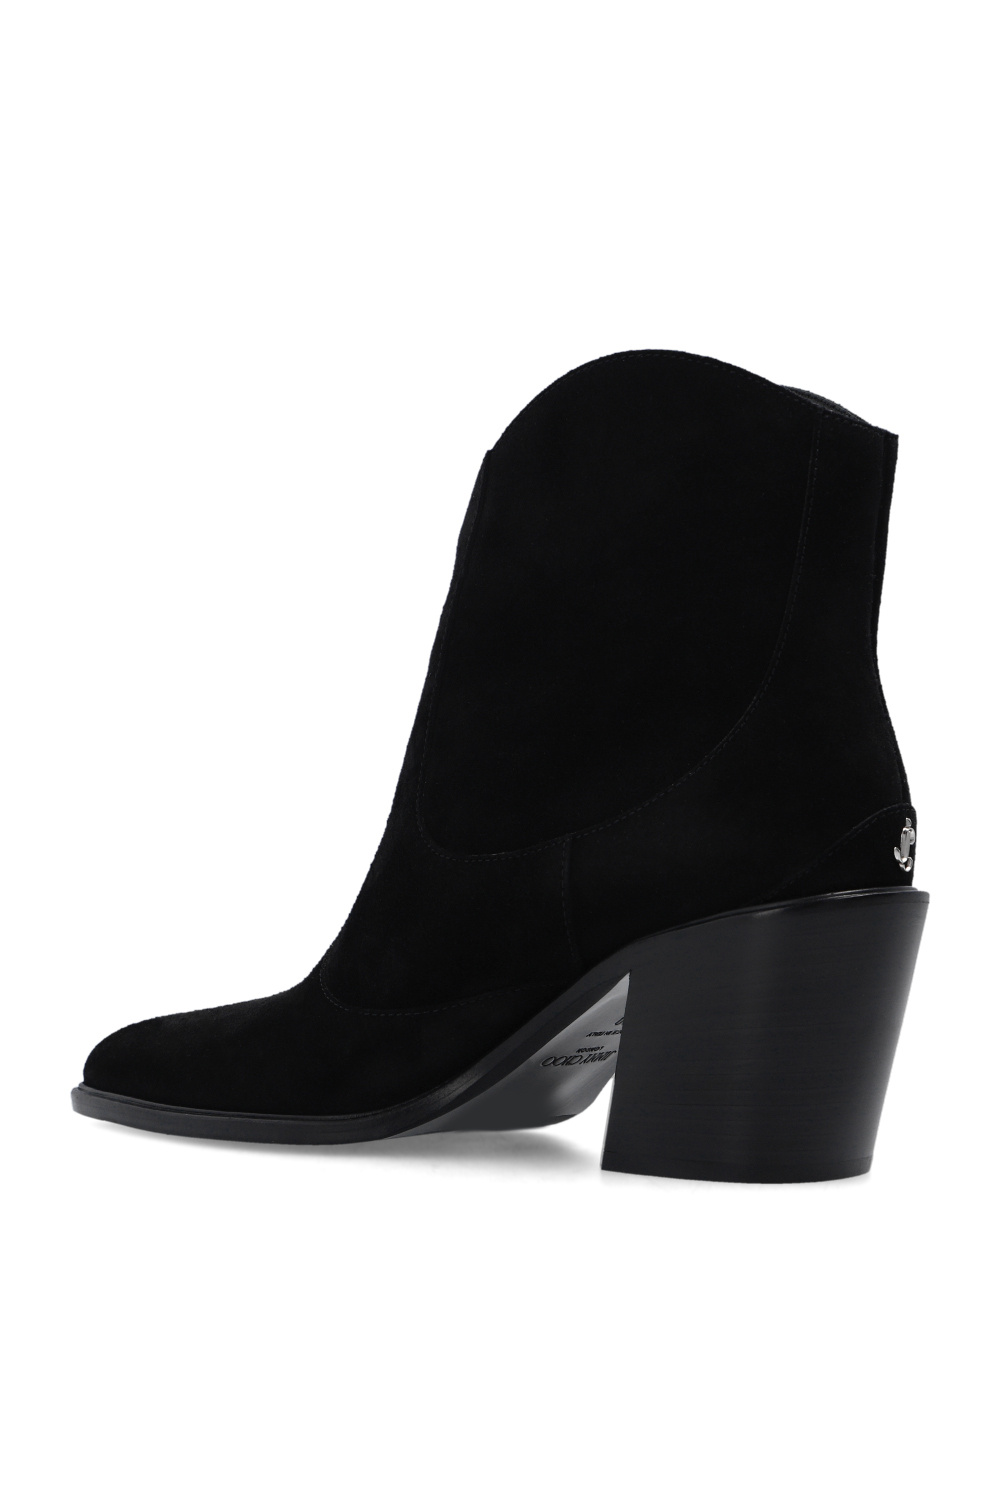 Jimmy Choo ‘Cynthi’ heeled ankle boots